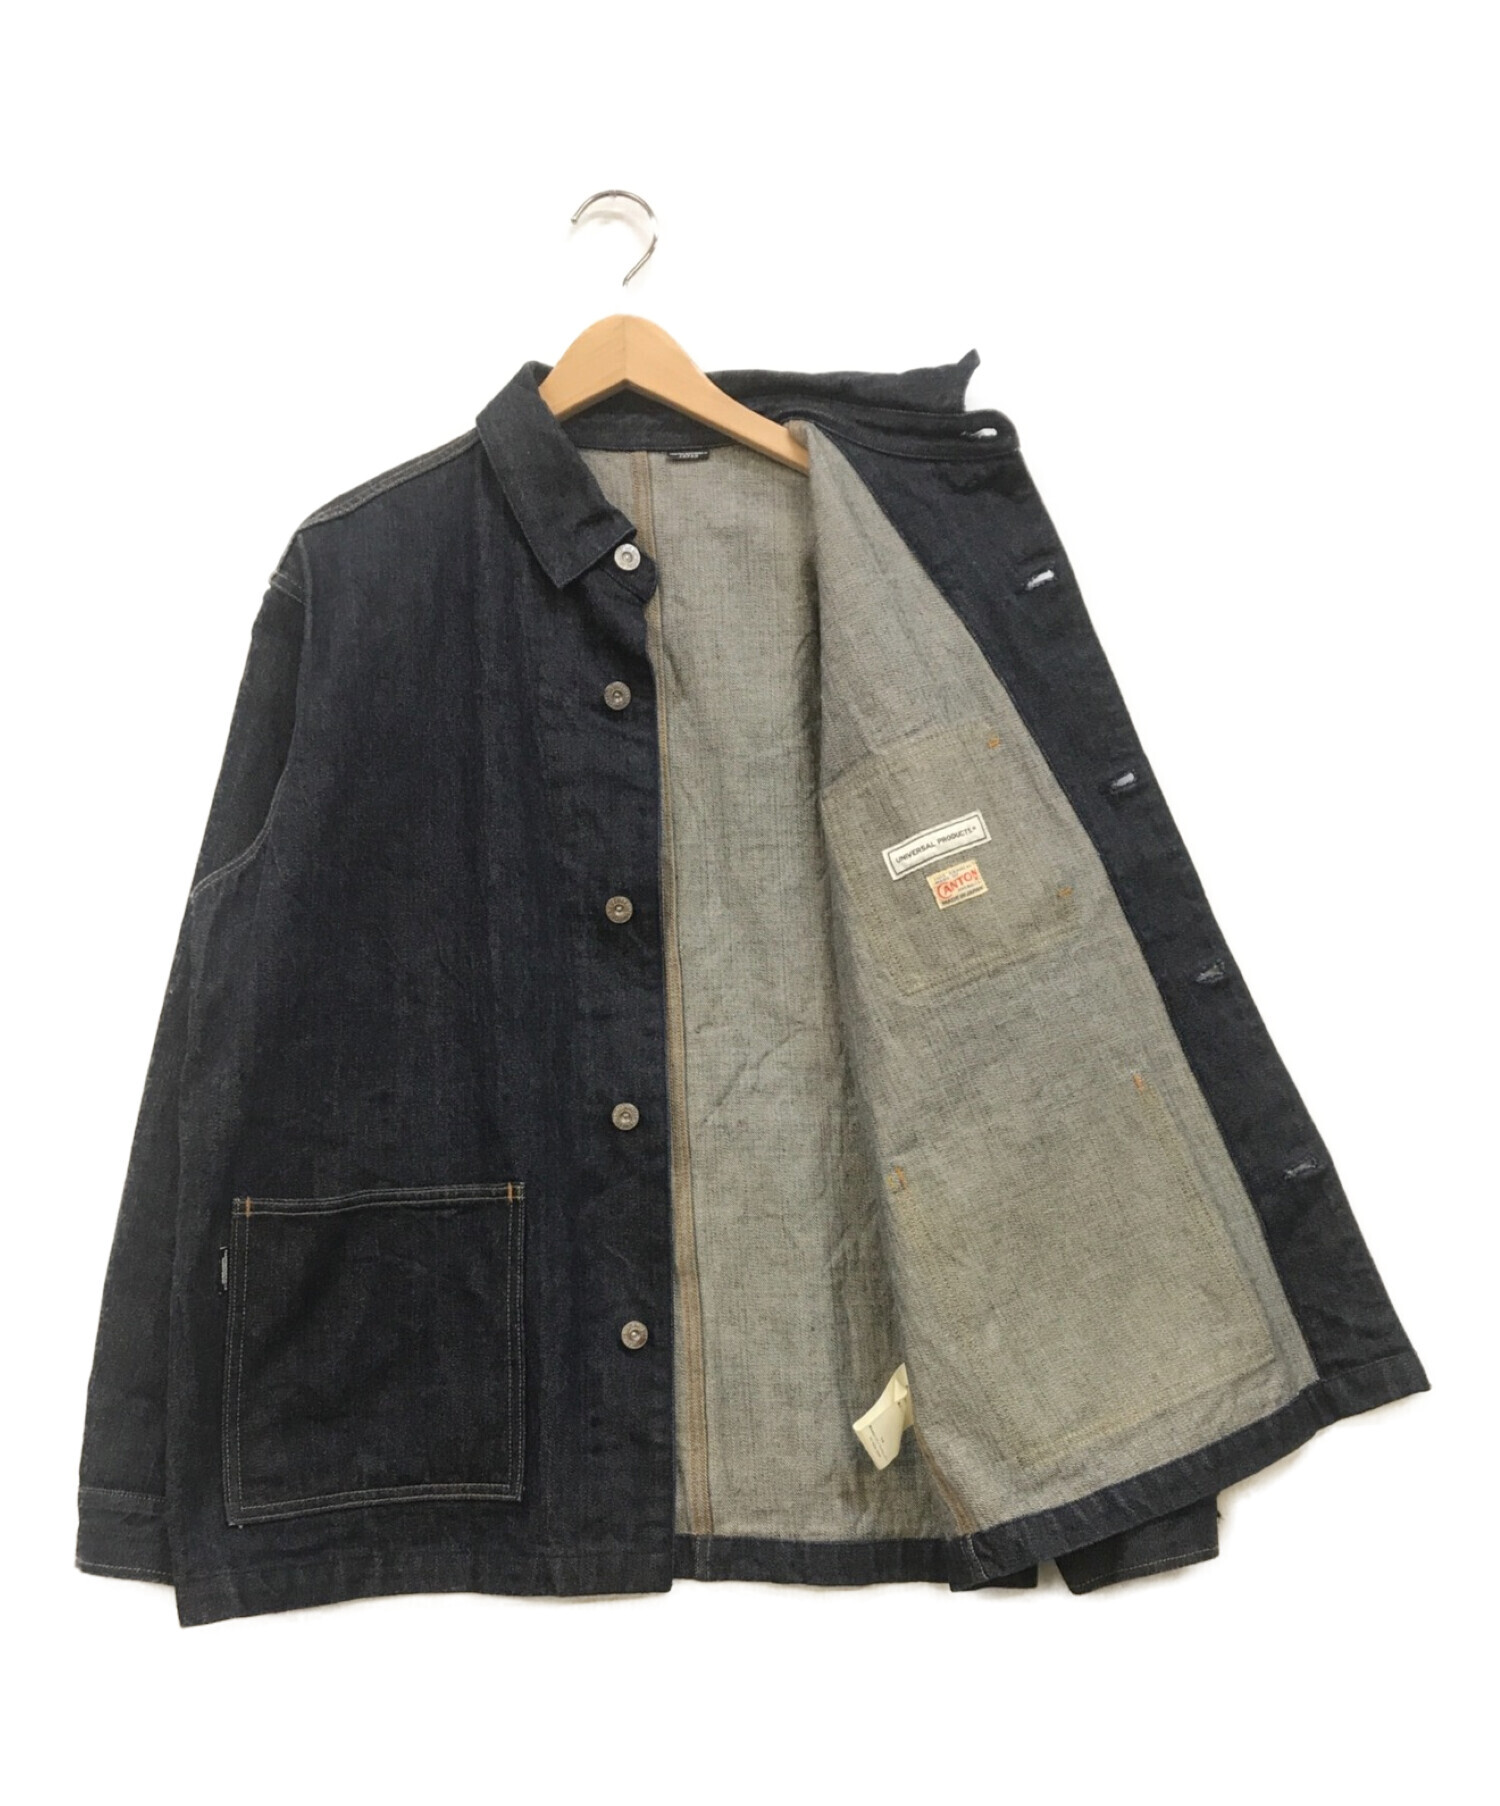 universal products × canton coverall xx - Gジャン/デニムジャケット